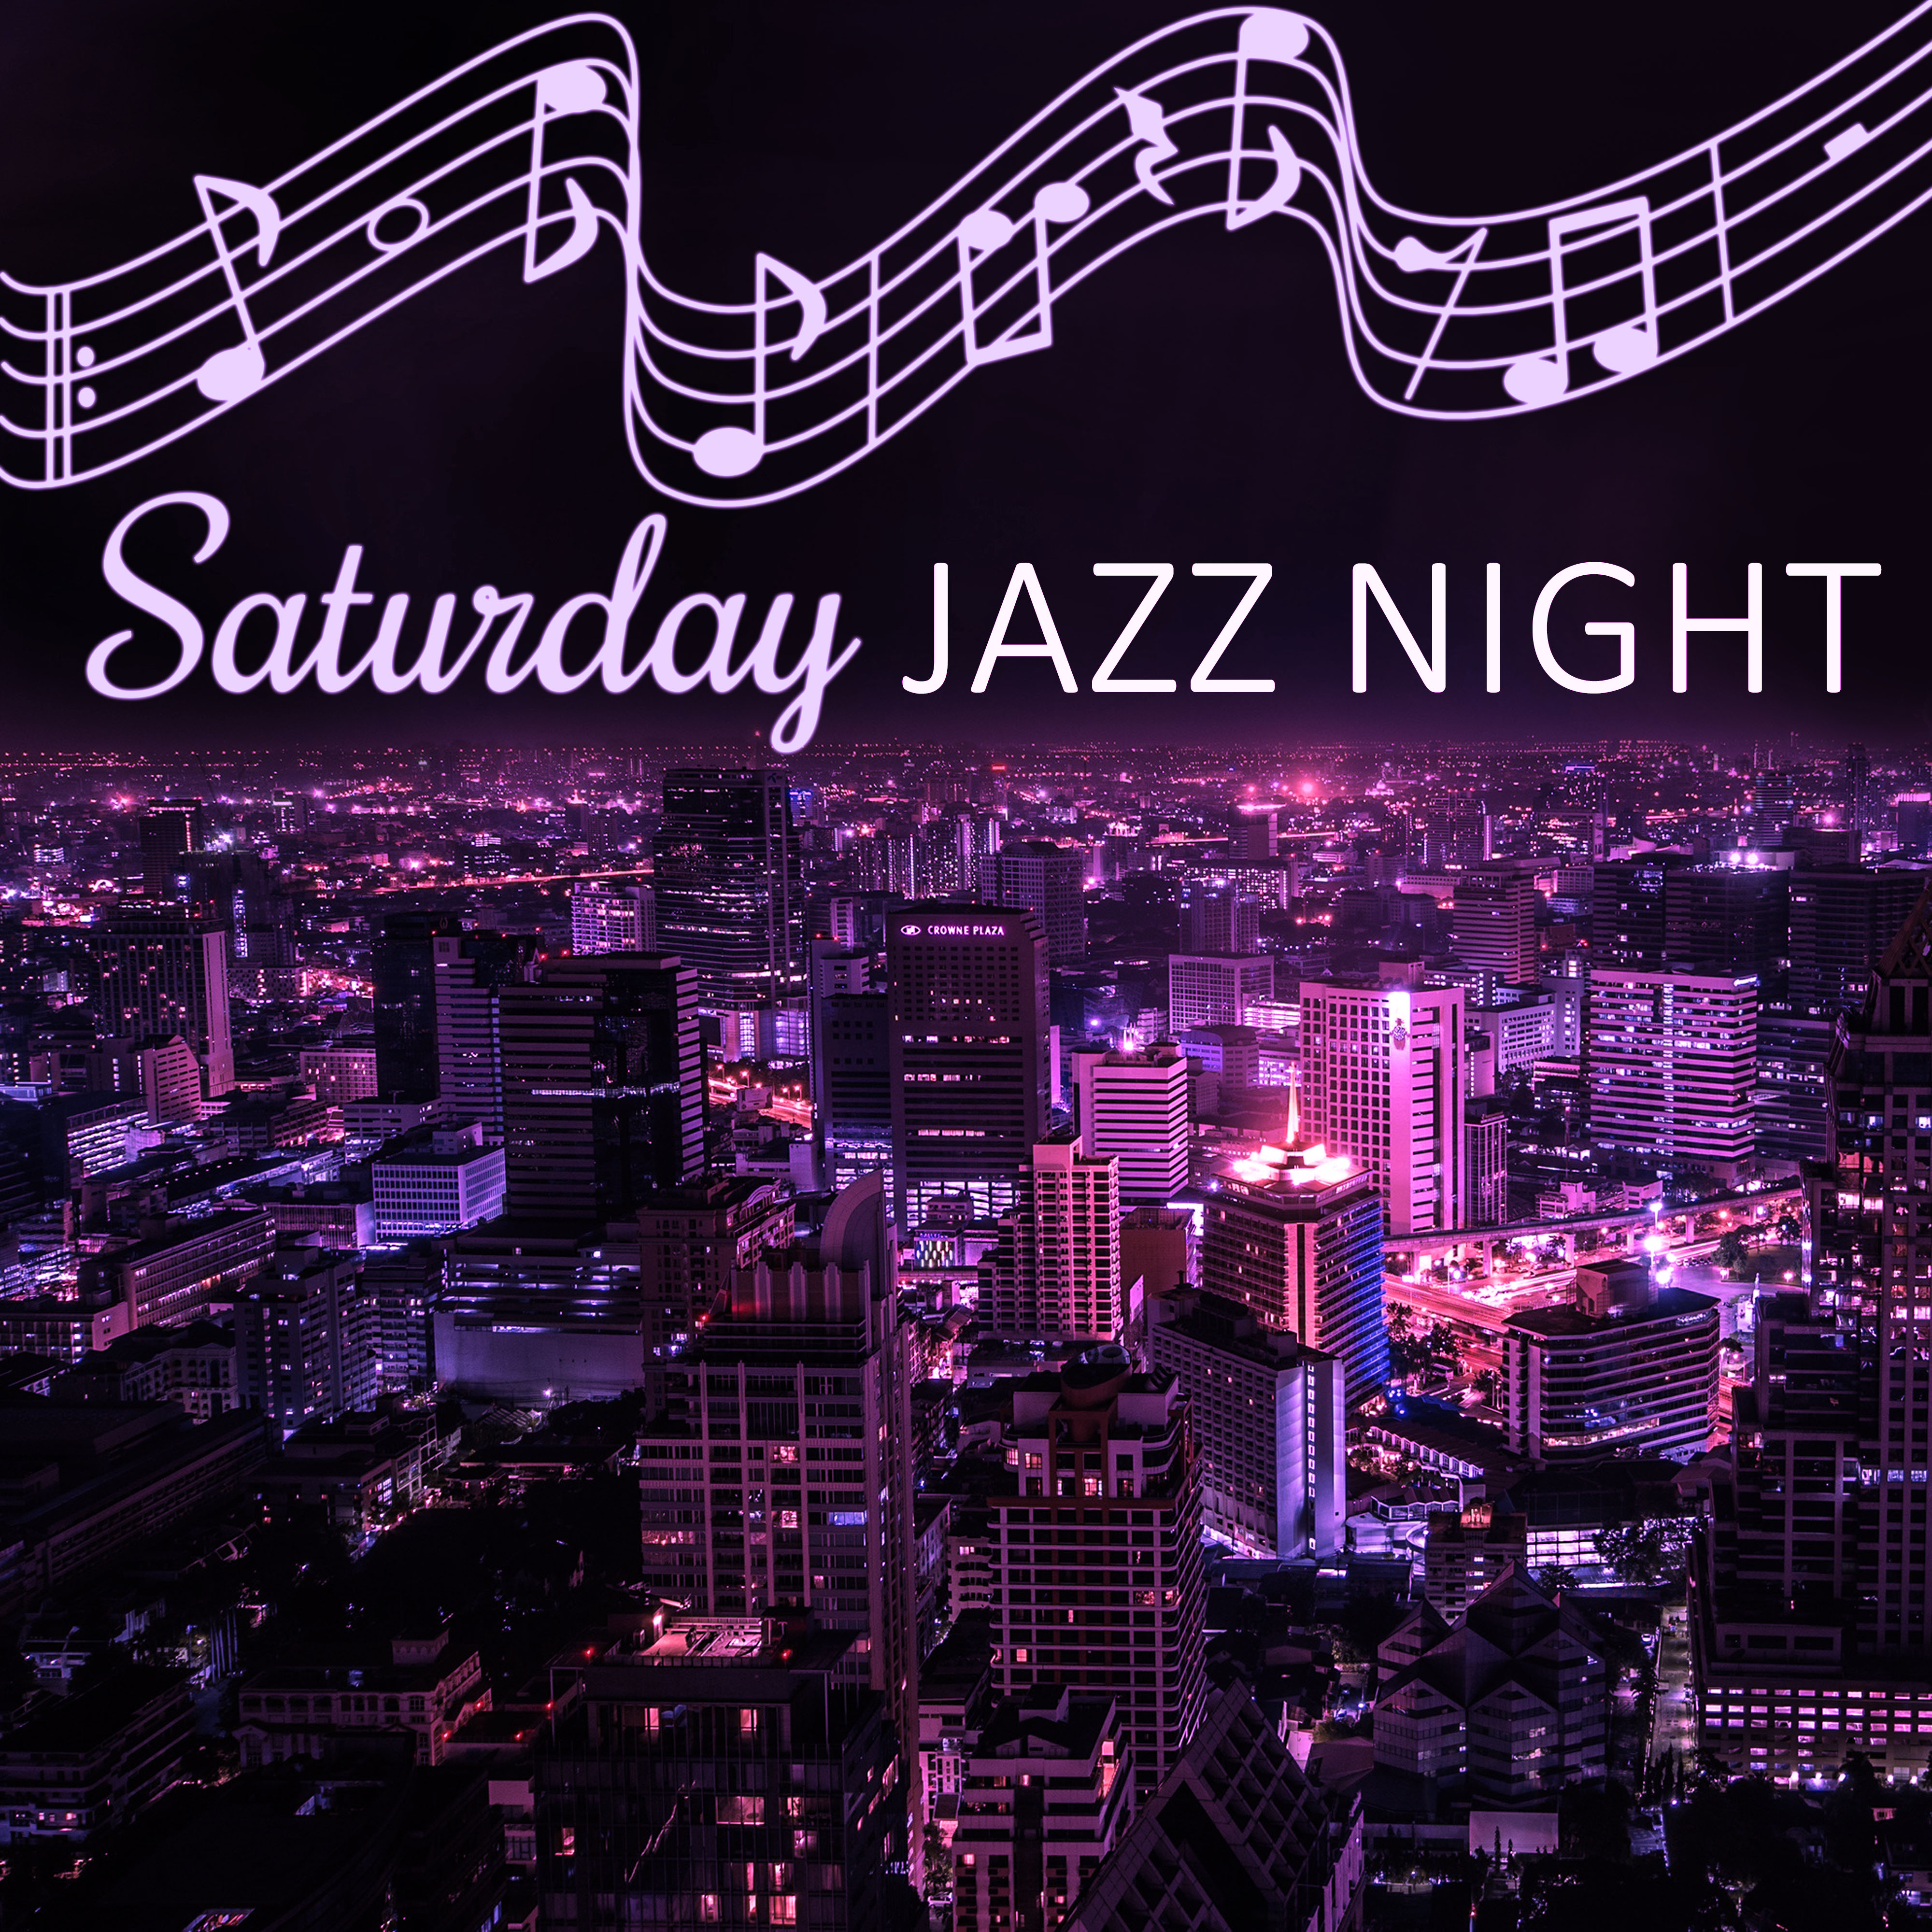 Saturday Jazz Night – Best Piano Music for Relaxation, Favourite Jazz Sounds for Restaurant, Relax Yourself, Most Relaxing Music to Relieve Stress